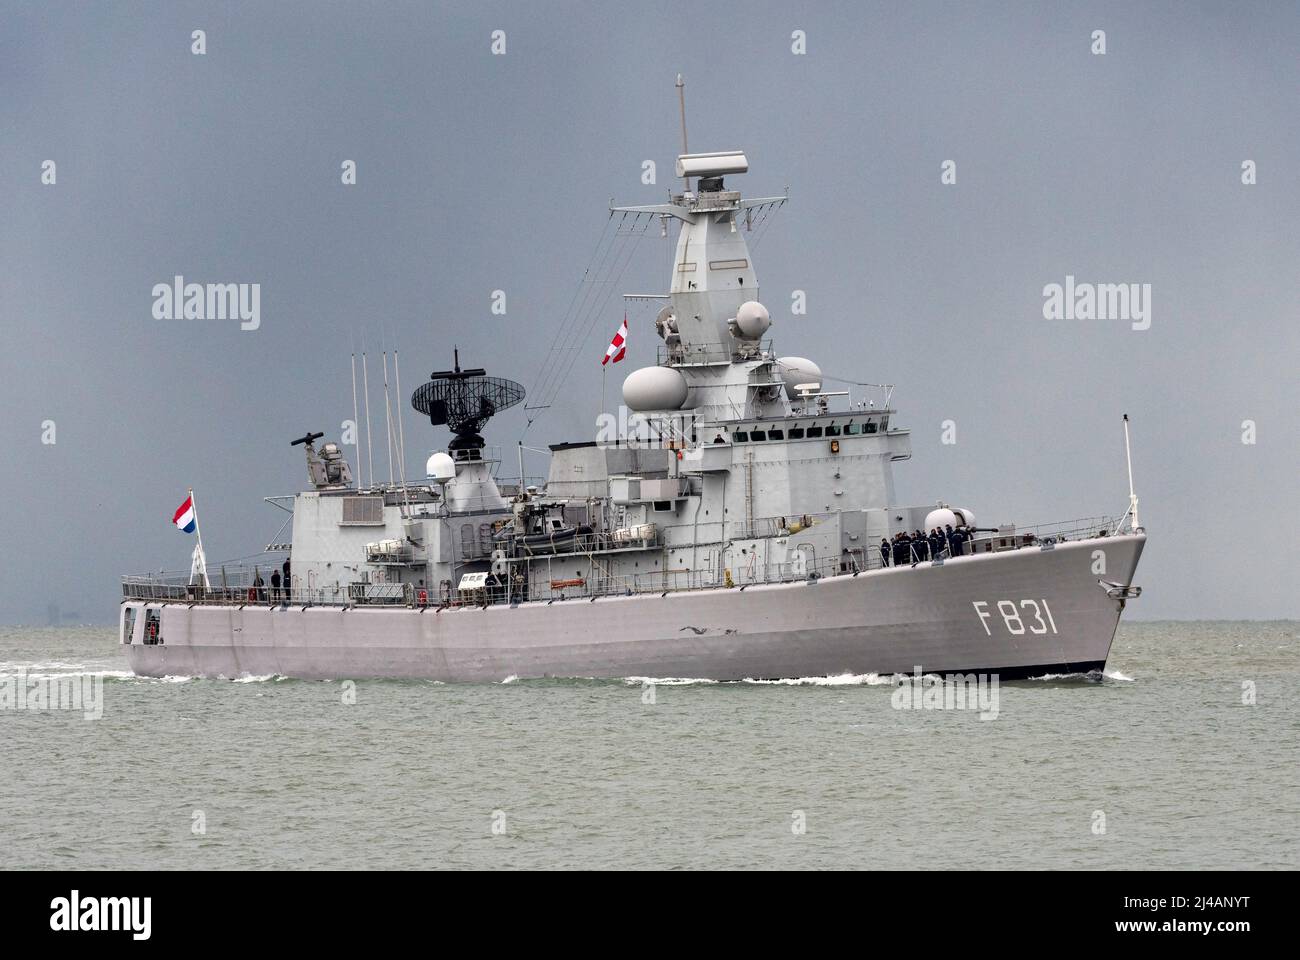 HNLMS Van Amstel (F831) is an M-Class frigate operated by the Royal Netherlands Navy - November 2016. Stock Photo